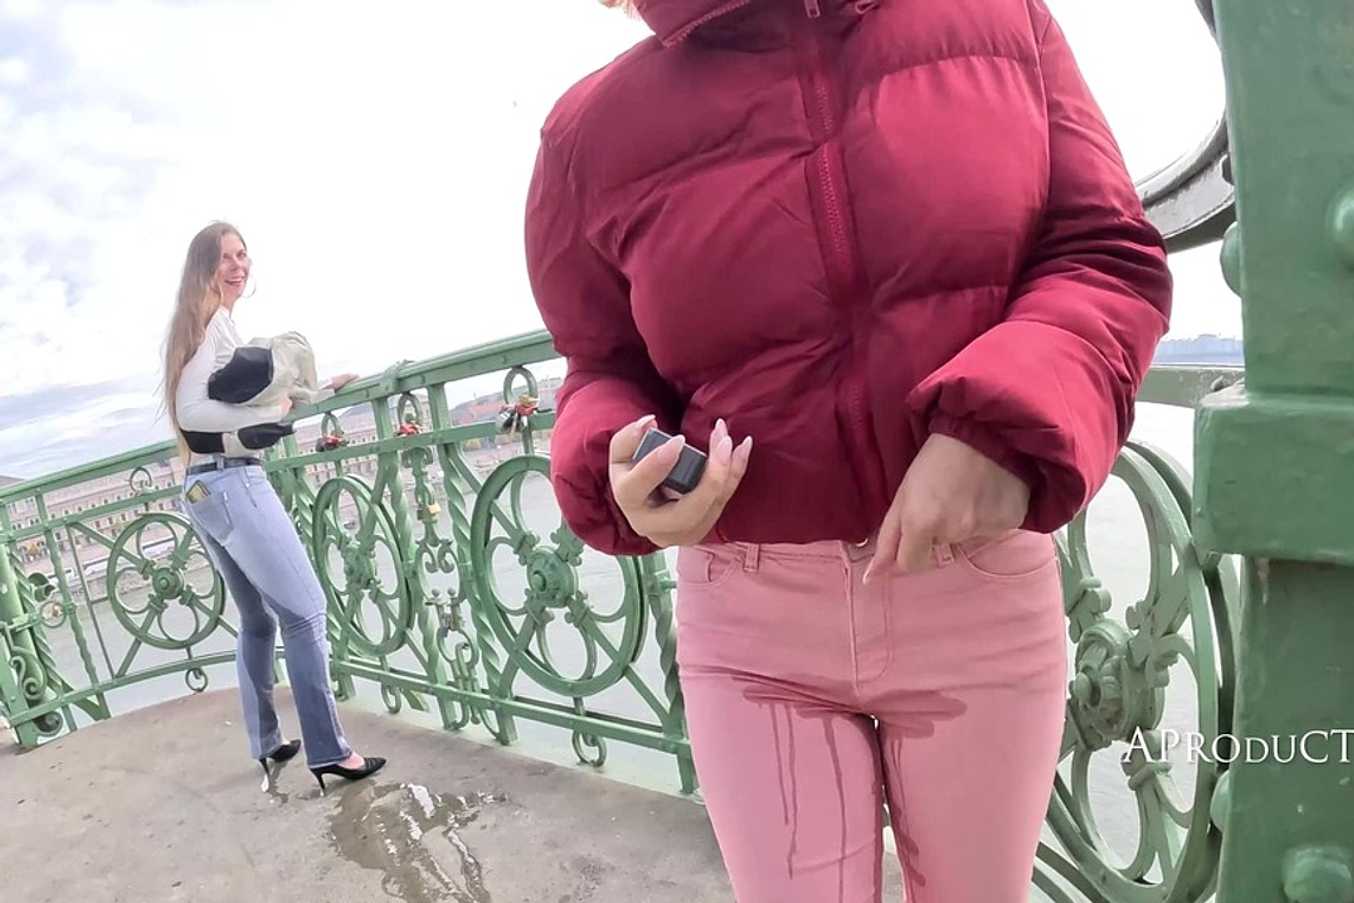 Thumbnail of Wetting in their Jeans together on the bridge